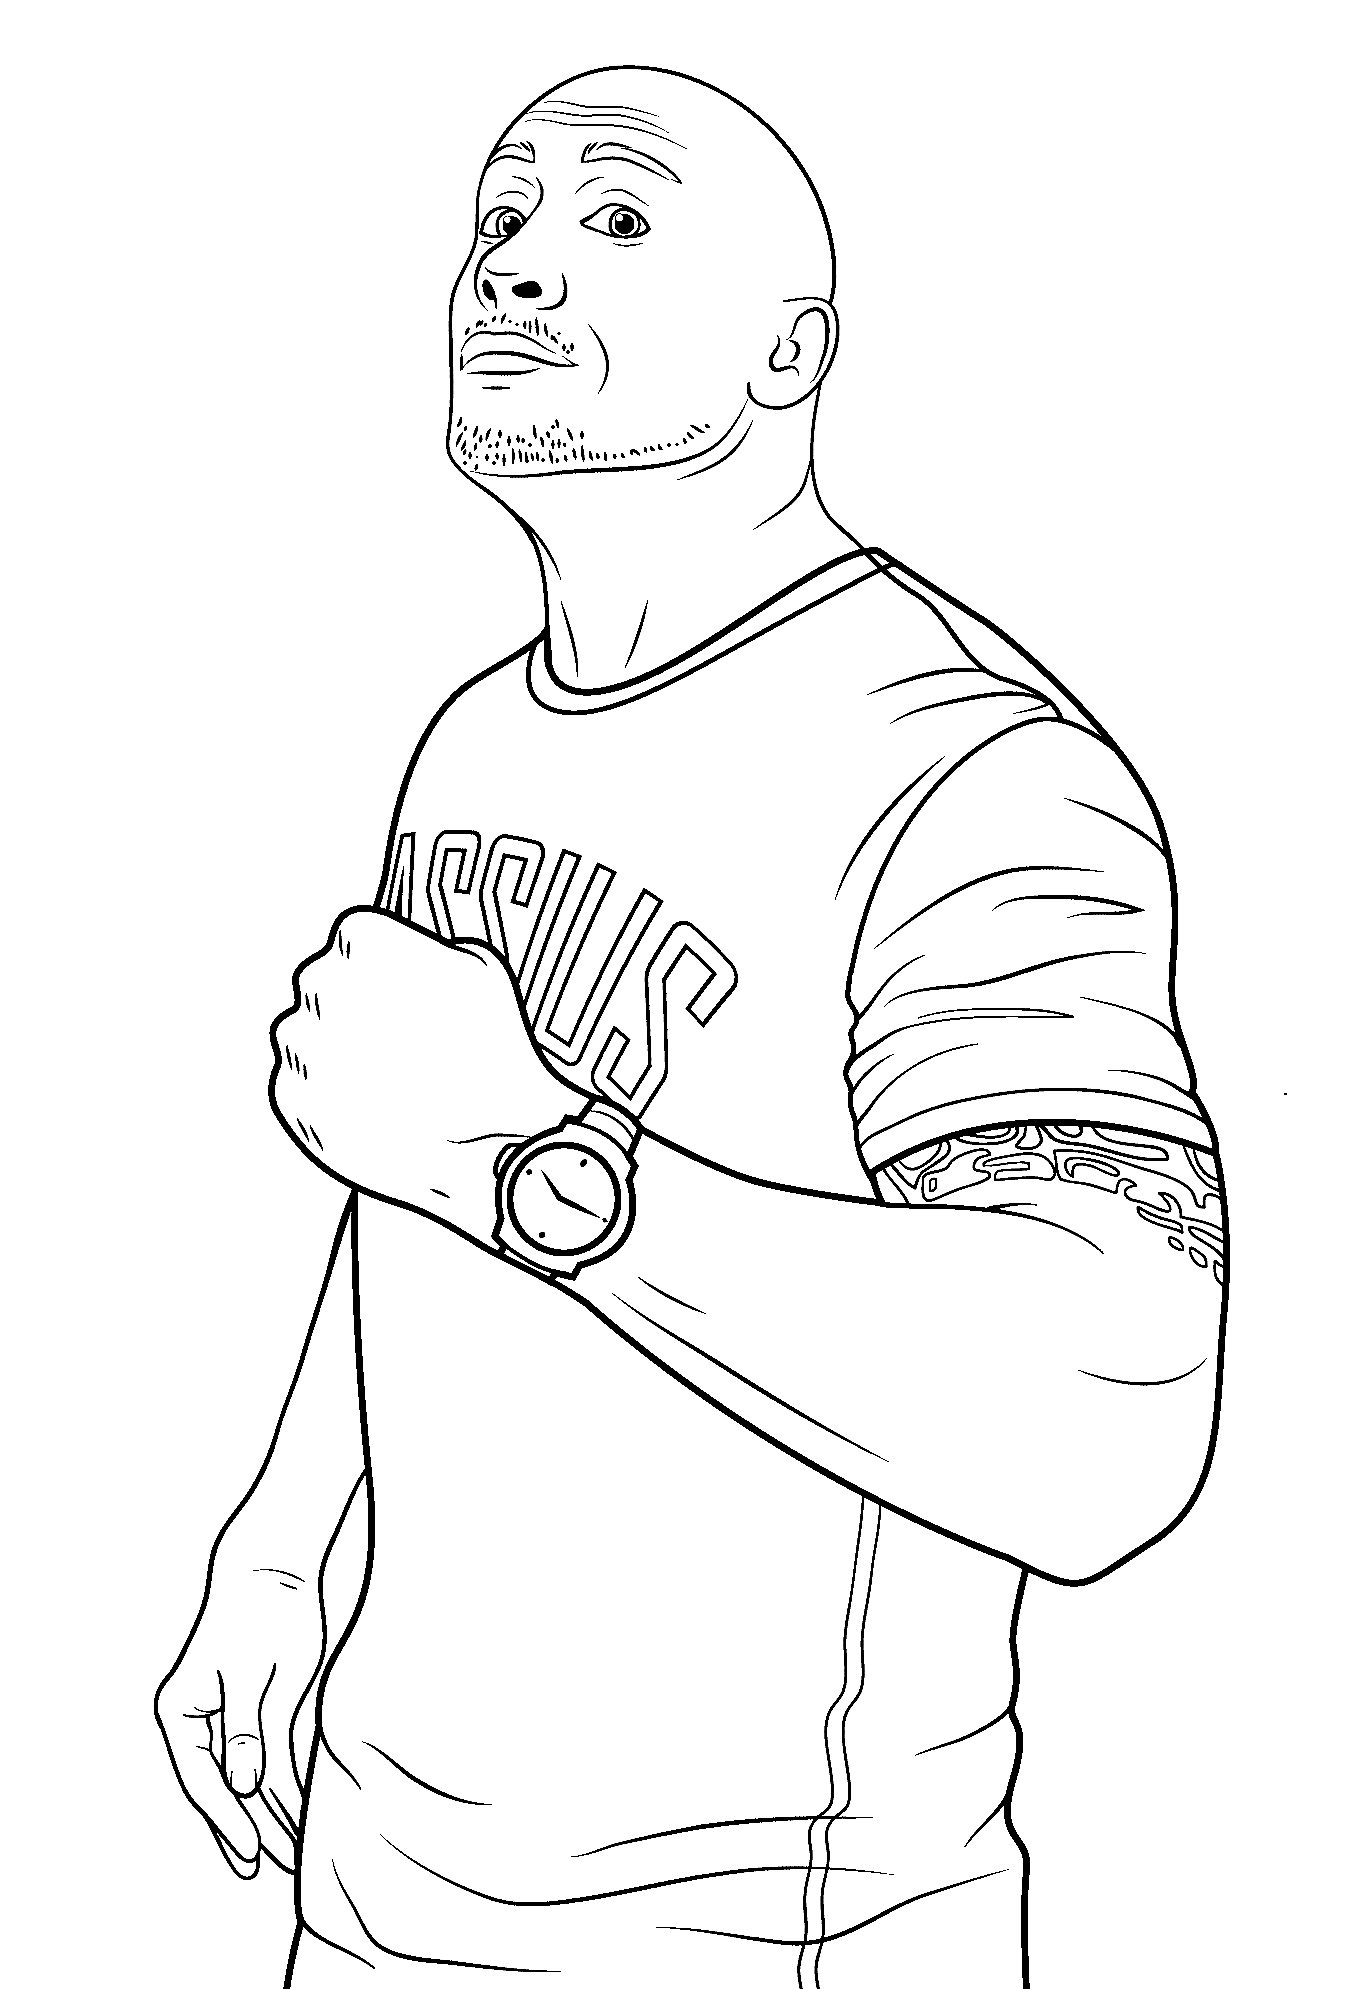 WWE Dwayne The Rock Johnson Coloring Pages